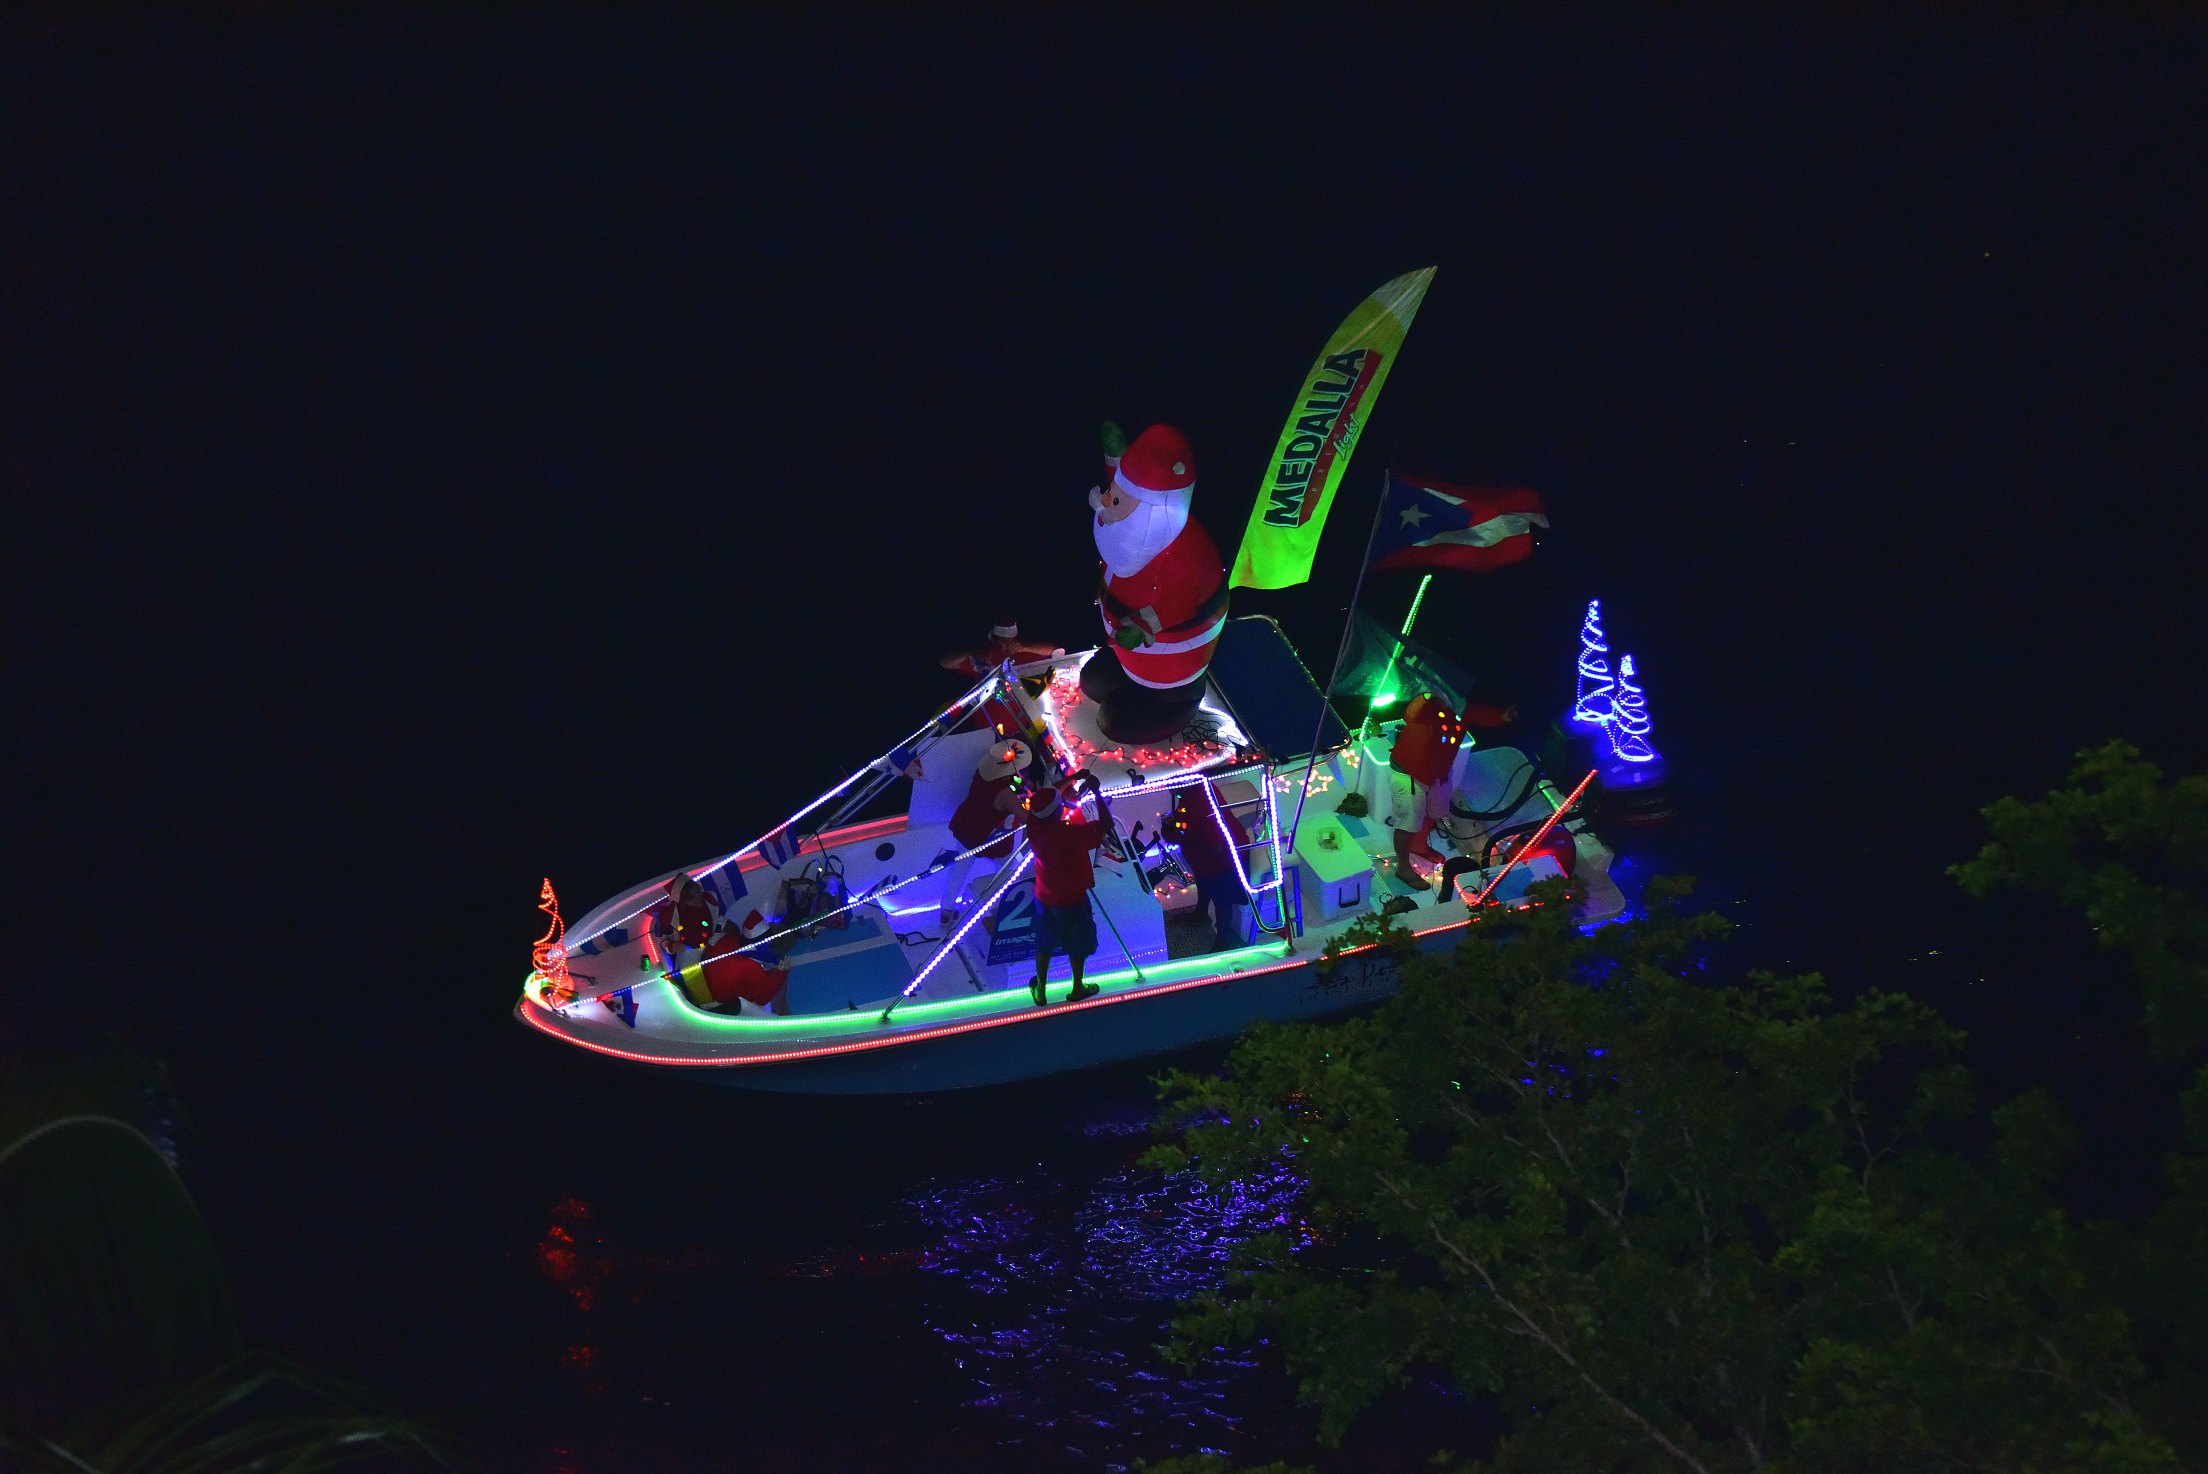 Poseidon Marine, boat number 29 in the 2021 Winterfest Boat Parade